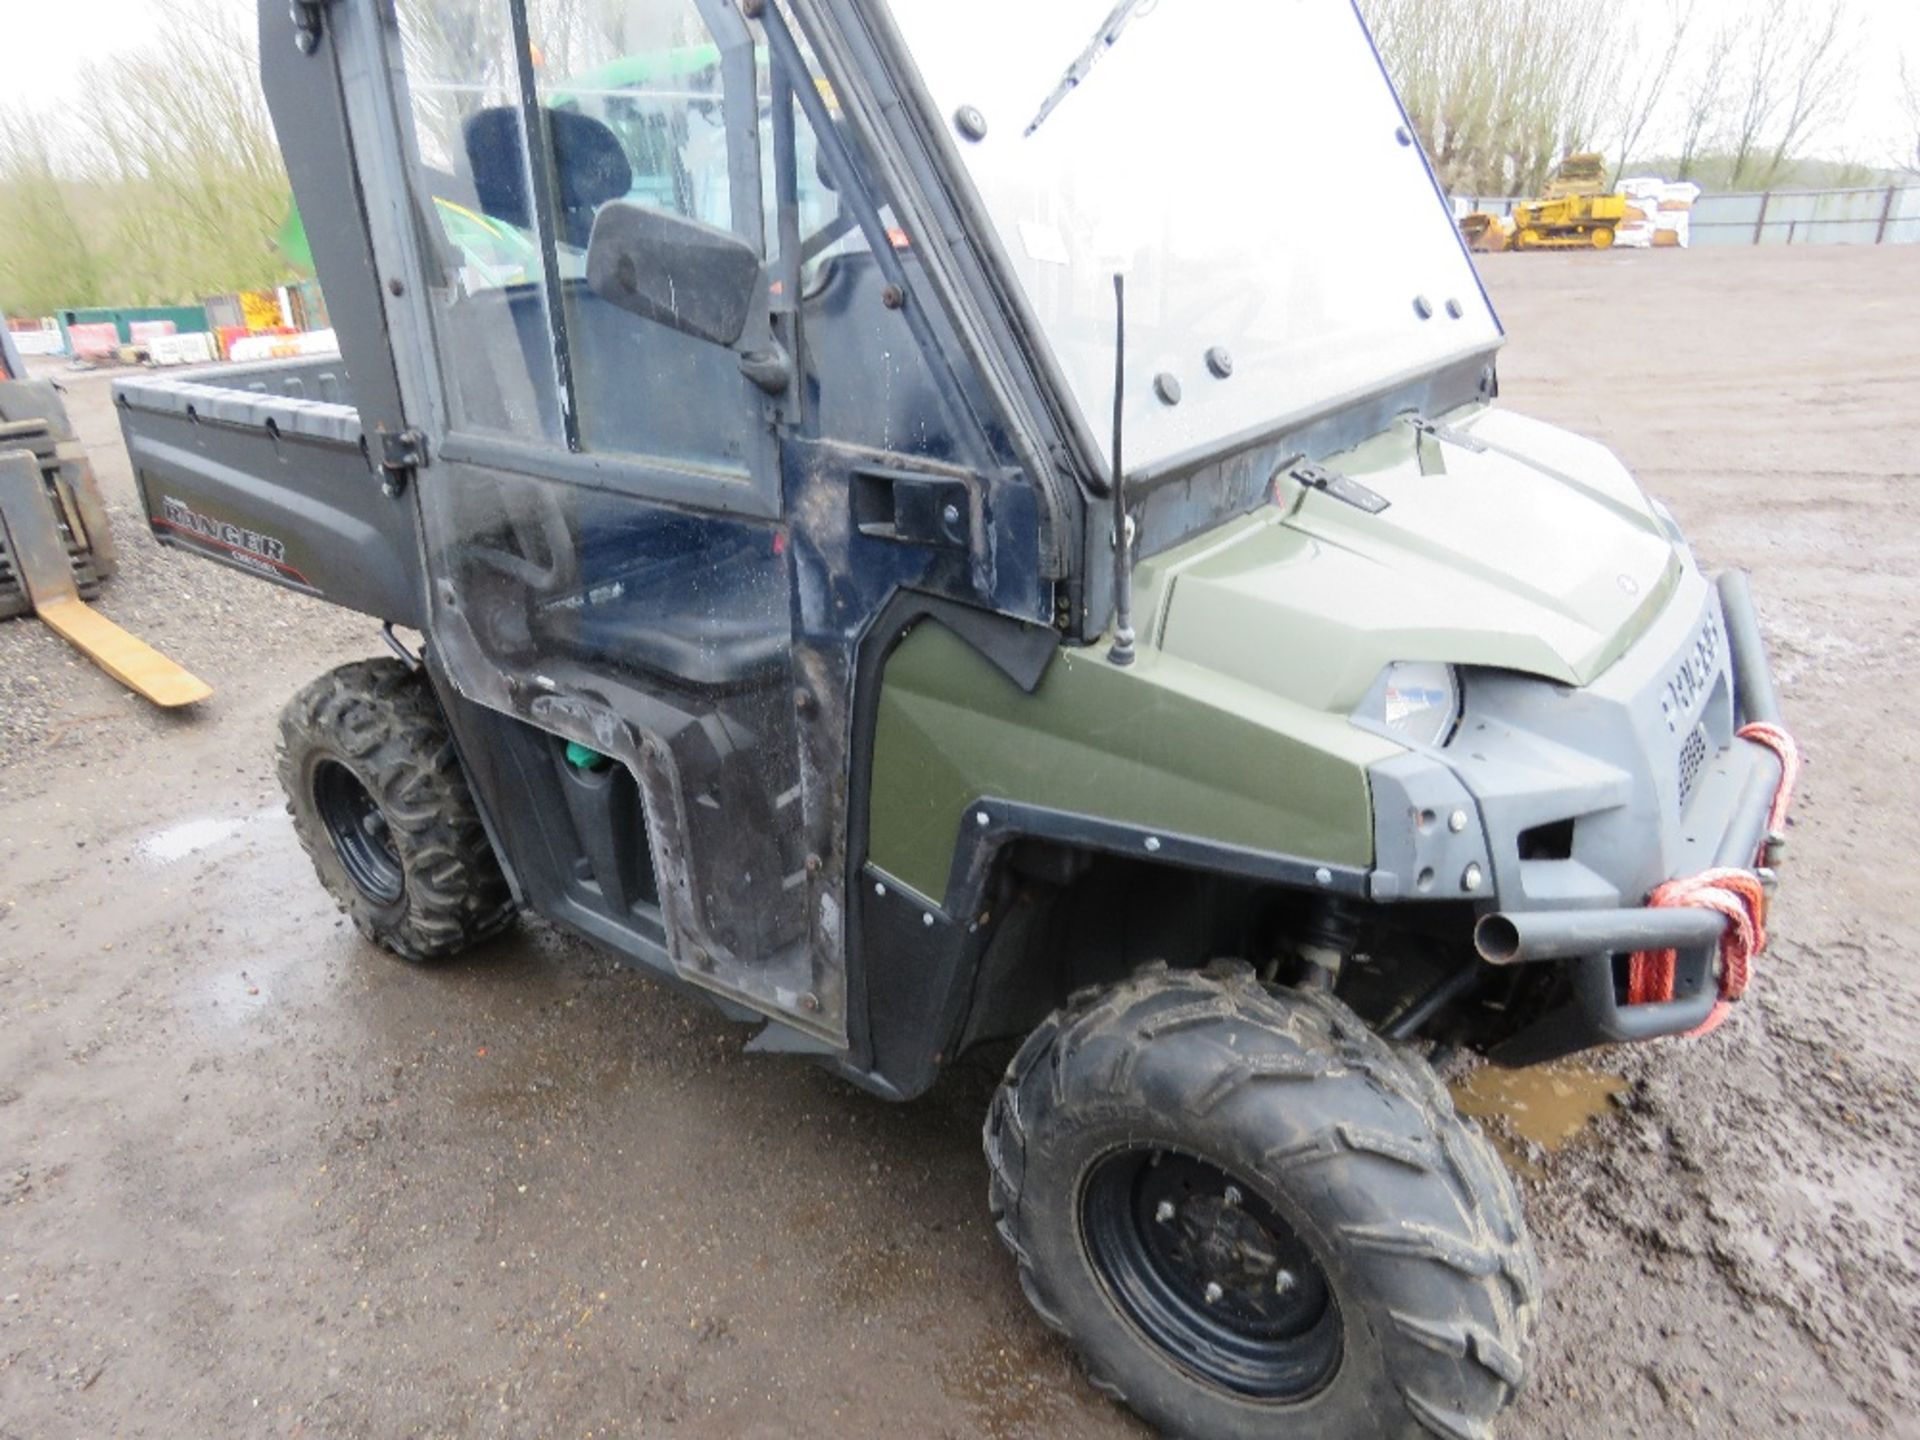 POLARIS 900D CABBED RANGER DIESEL ENGINED ROUGH TERRAIN OFF ROAD BUGGY UTILITY VEHICLE 1363 REC HOUR - Image 9 of 9